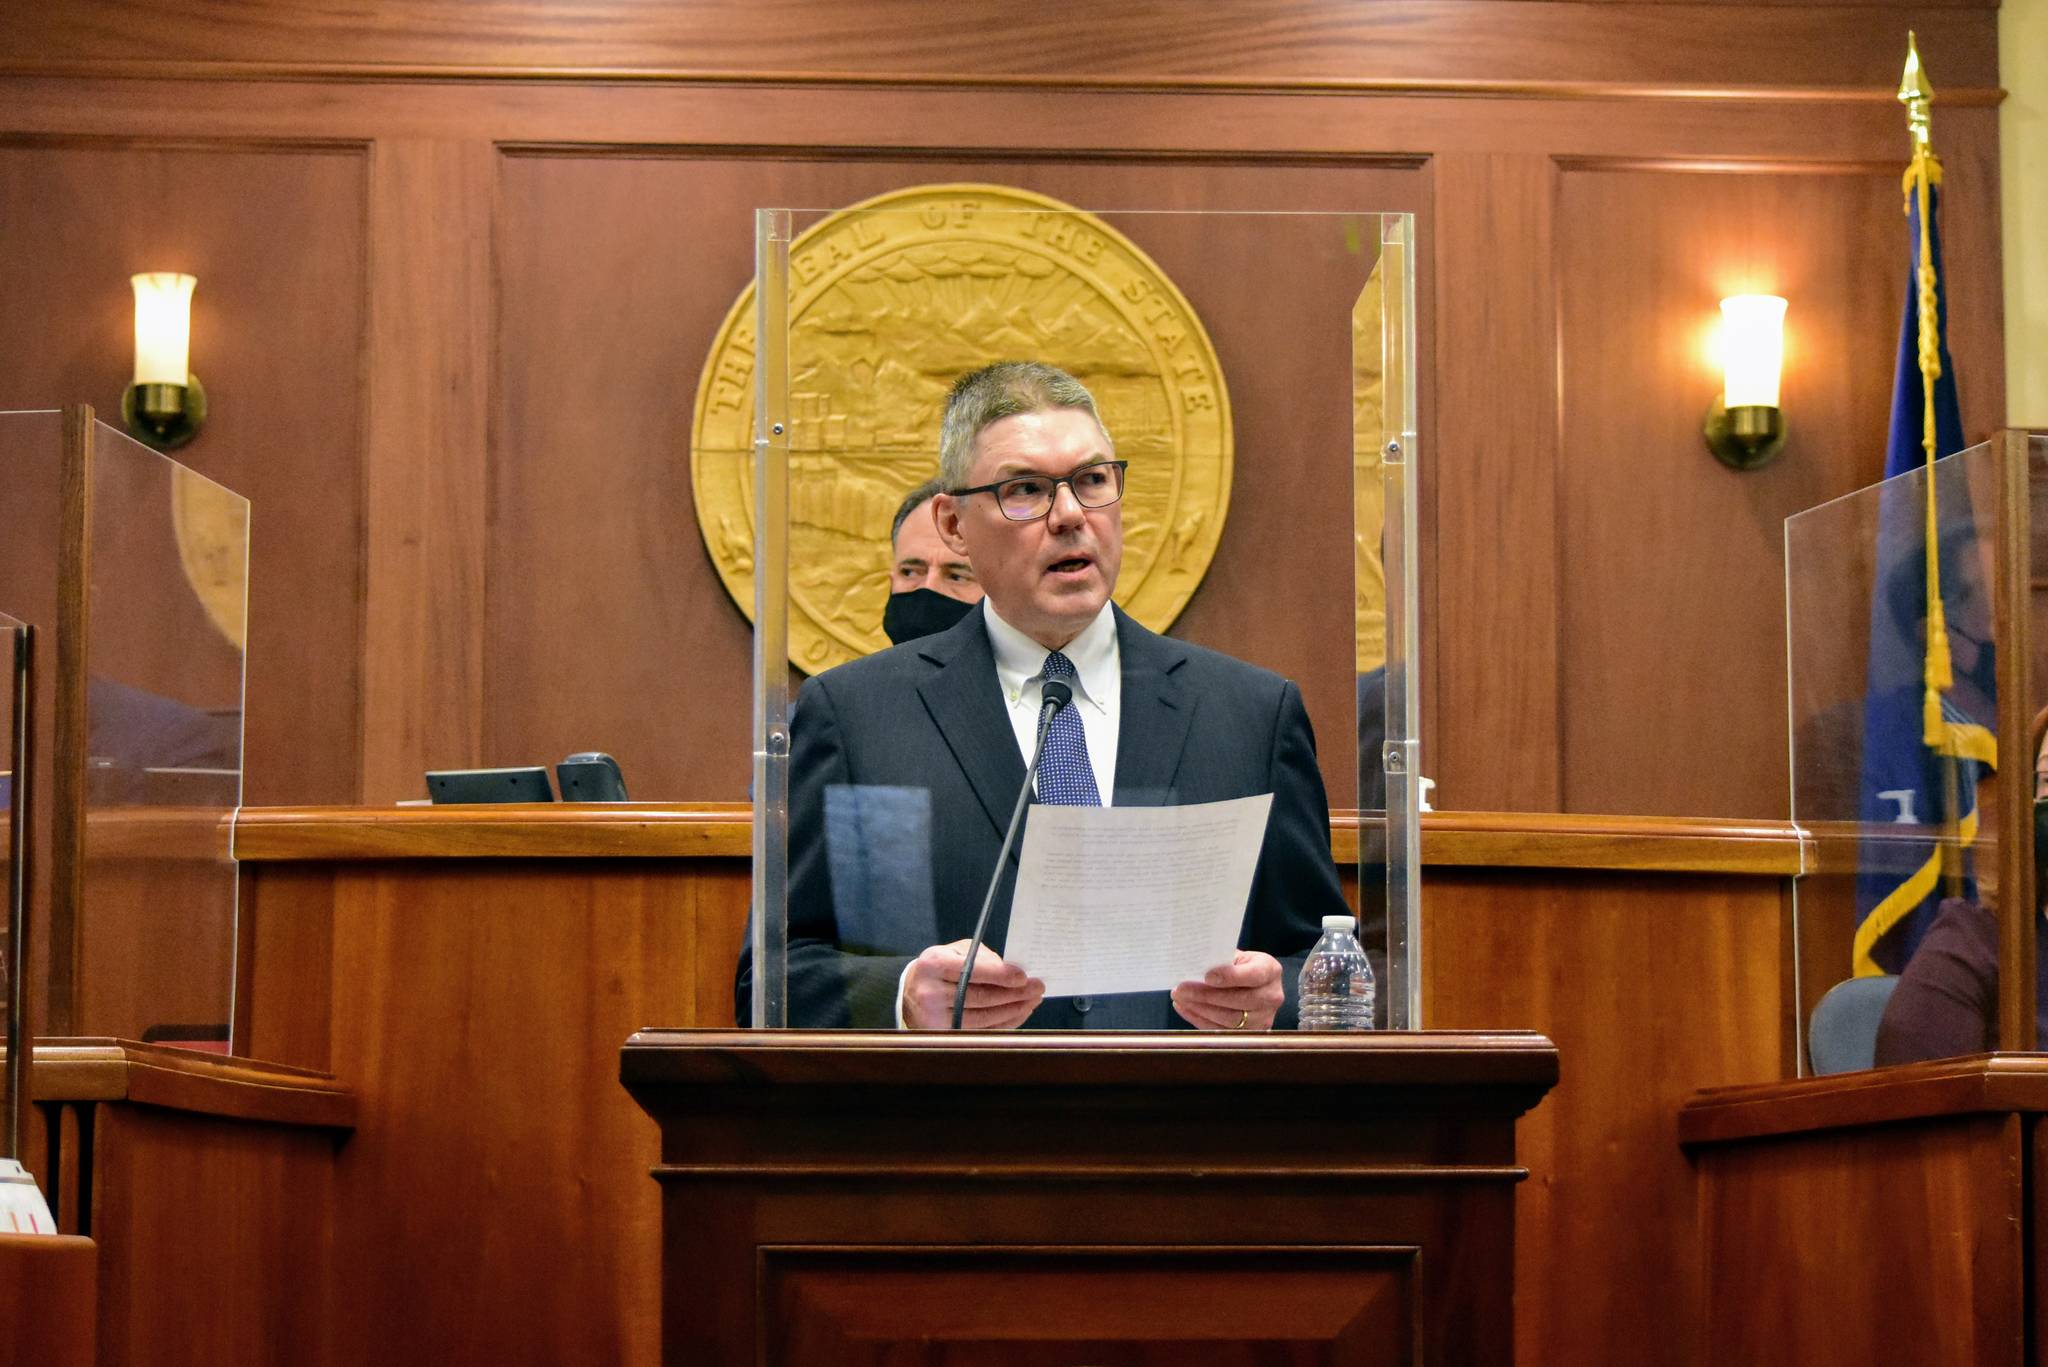 Chief Justice of the Alaska Supreme Court Joel Bolger speaks from behind a plexiglass encased podium to deliver the State of the Judiciary address to state lawmakers on Wednesday, Feb. 17, 2021. Despite complications posed by the pandemic, Bolger said Alaskan courts were still able to deliver services. (Peter Segall / Juneau Empire)